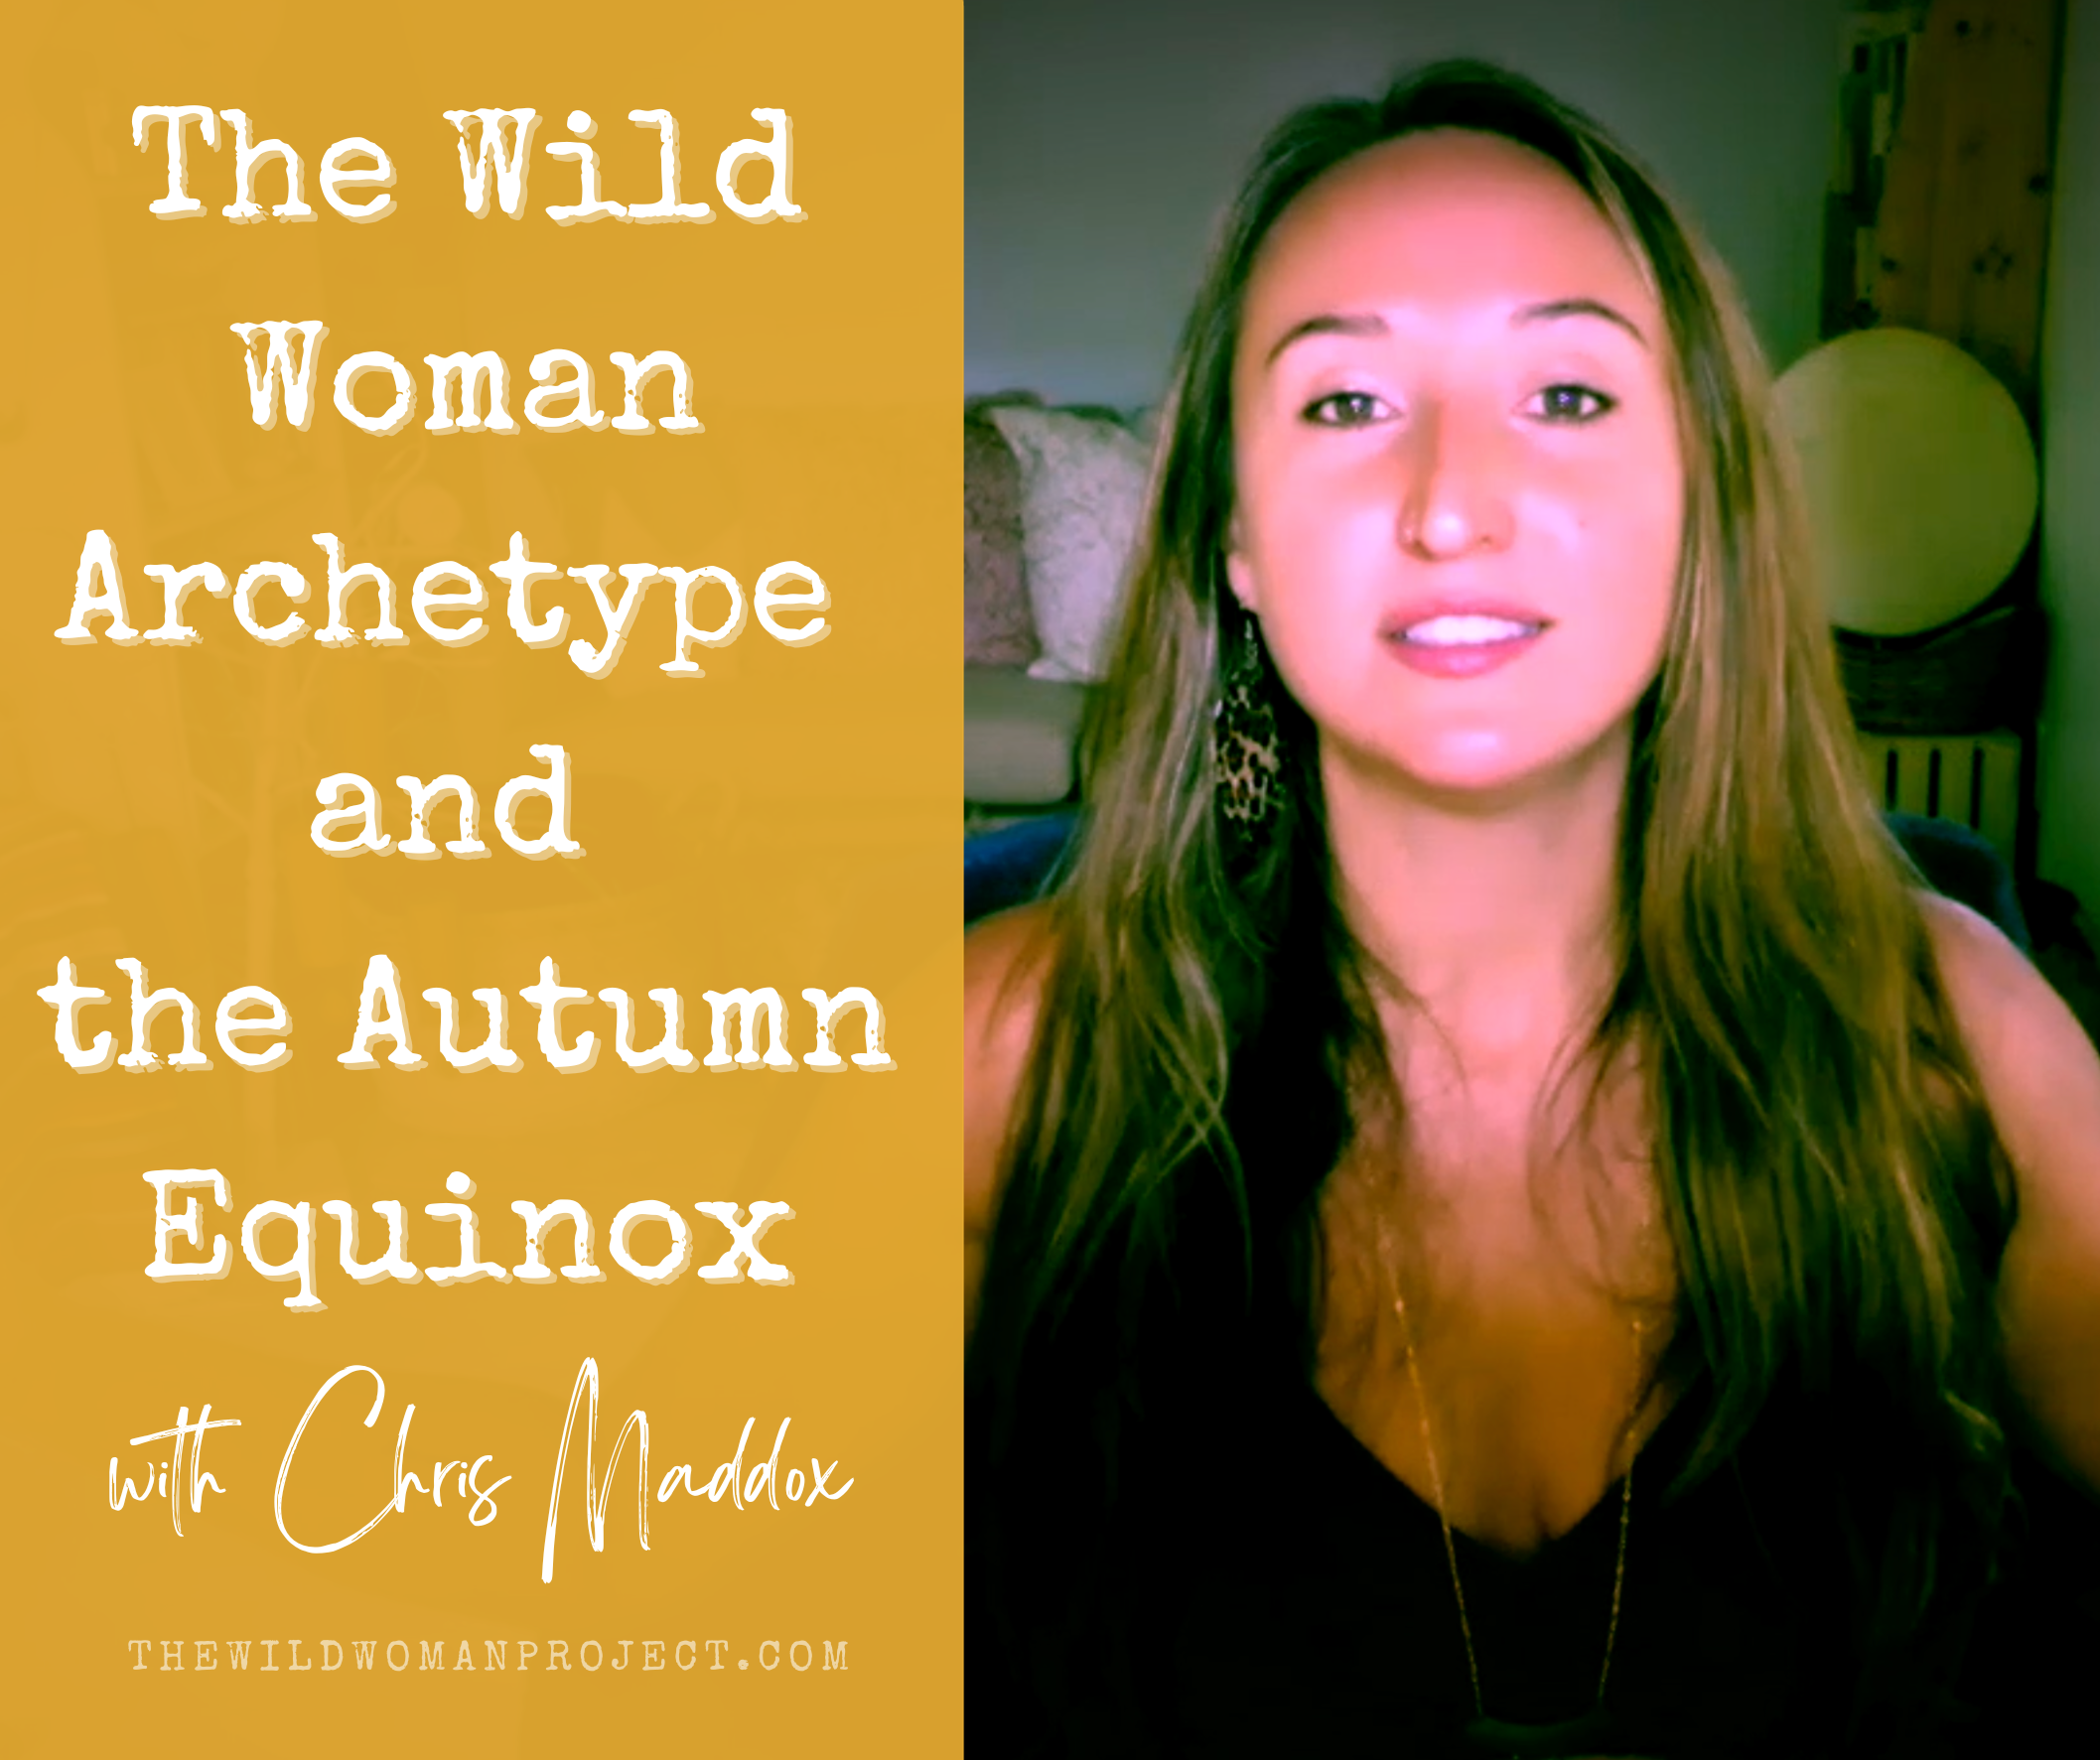 Chris Maddox speaks about the Wild Woman Archetype and the Autumn Equinox